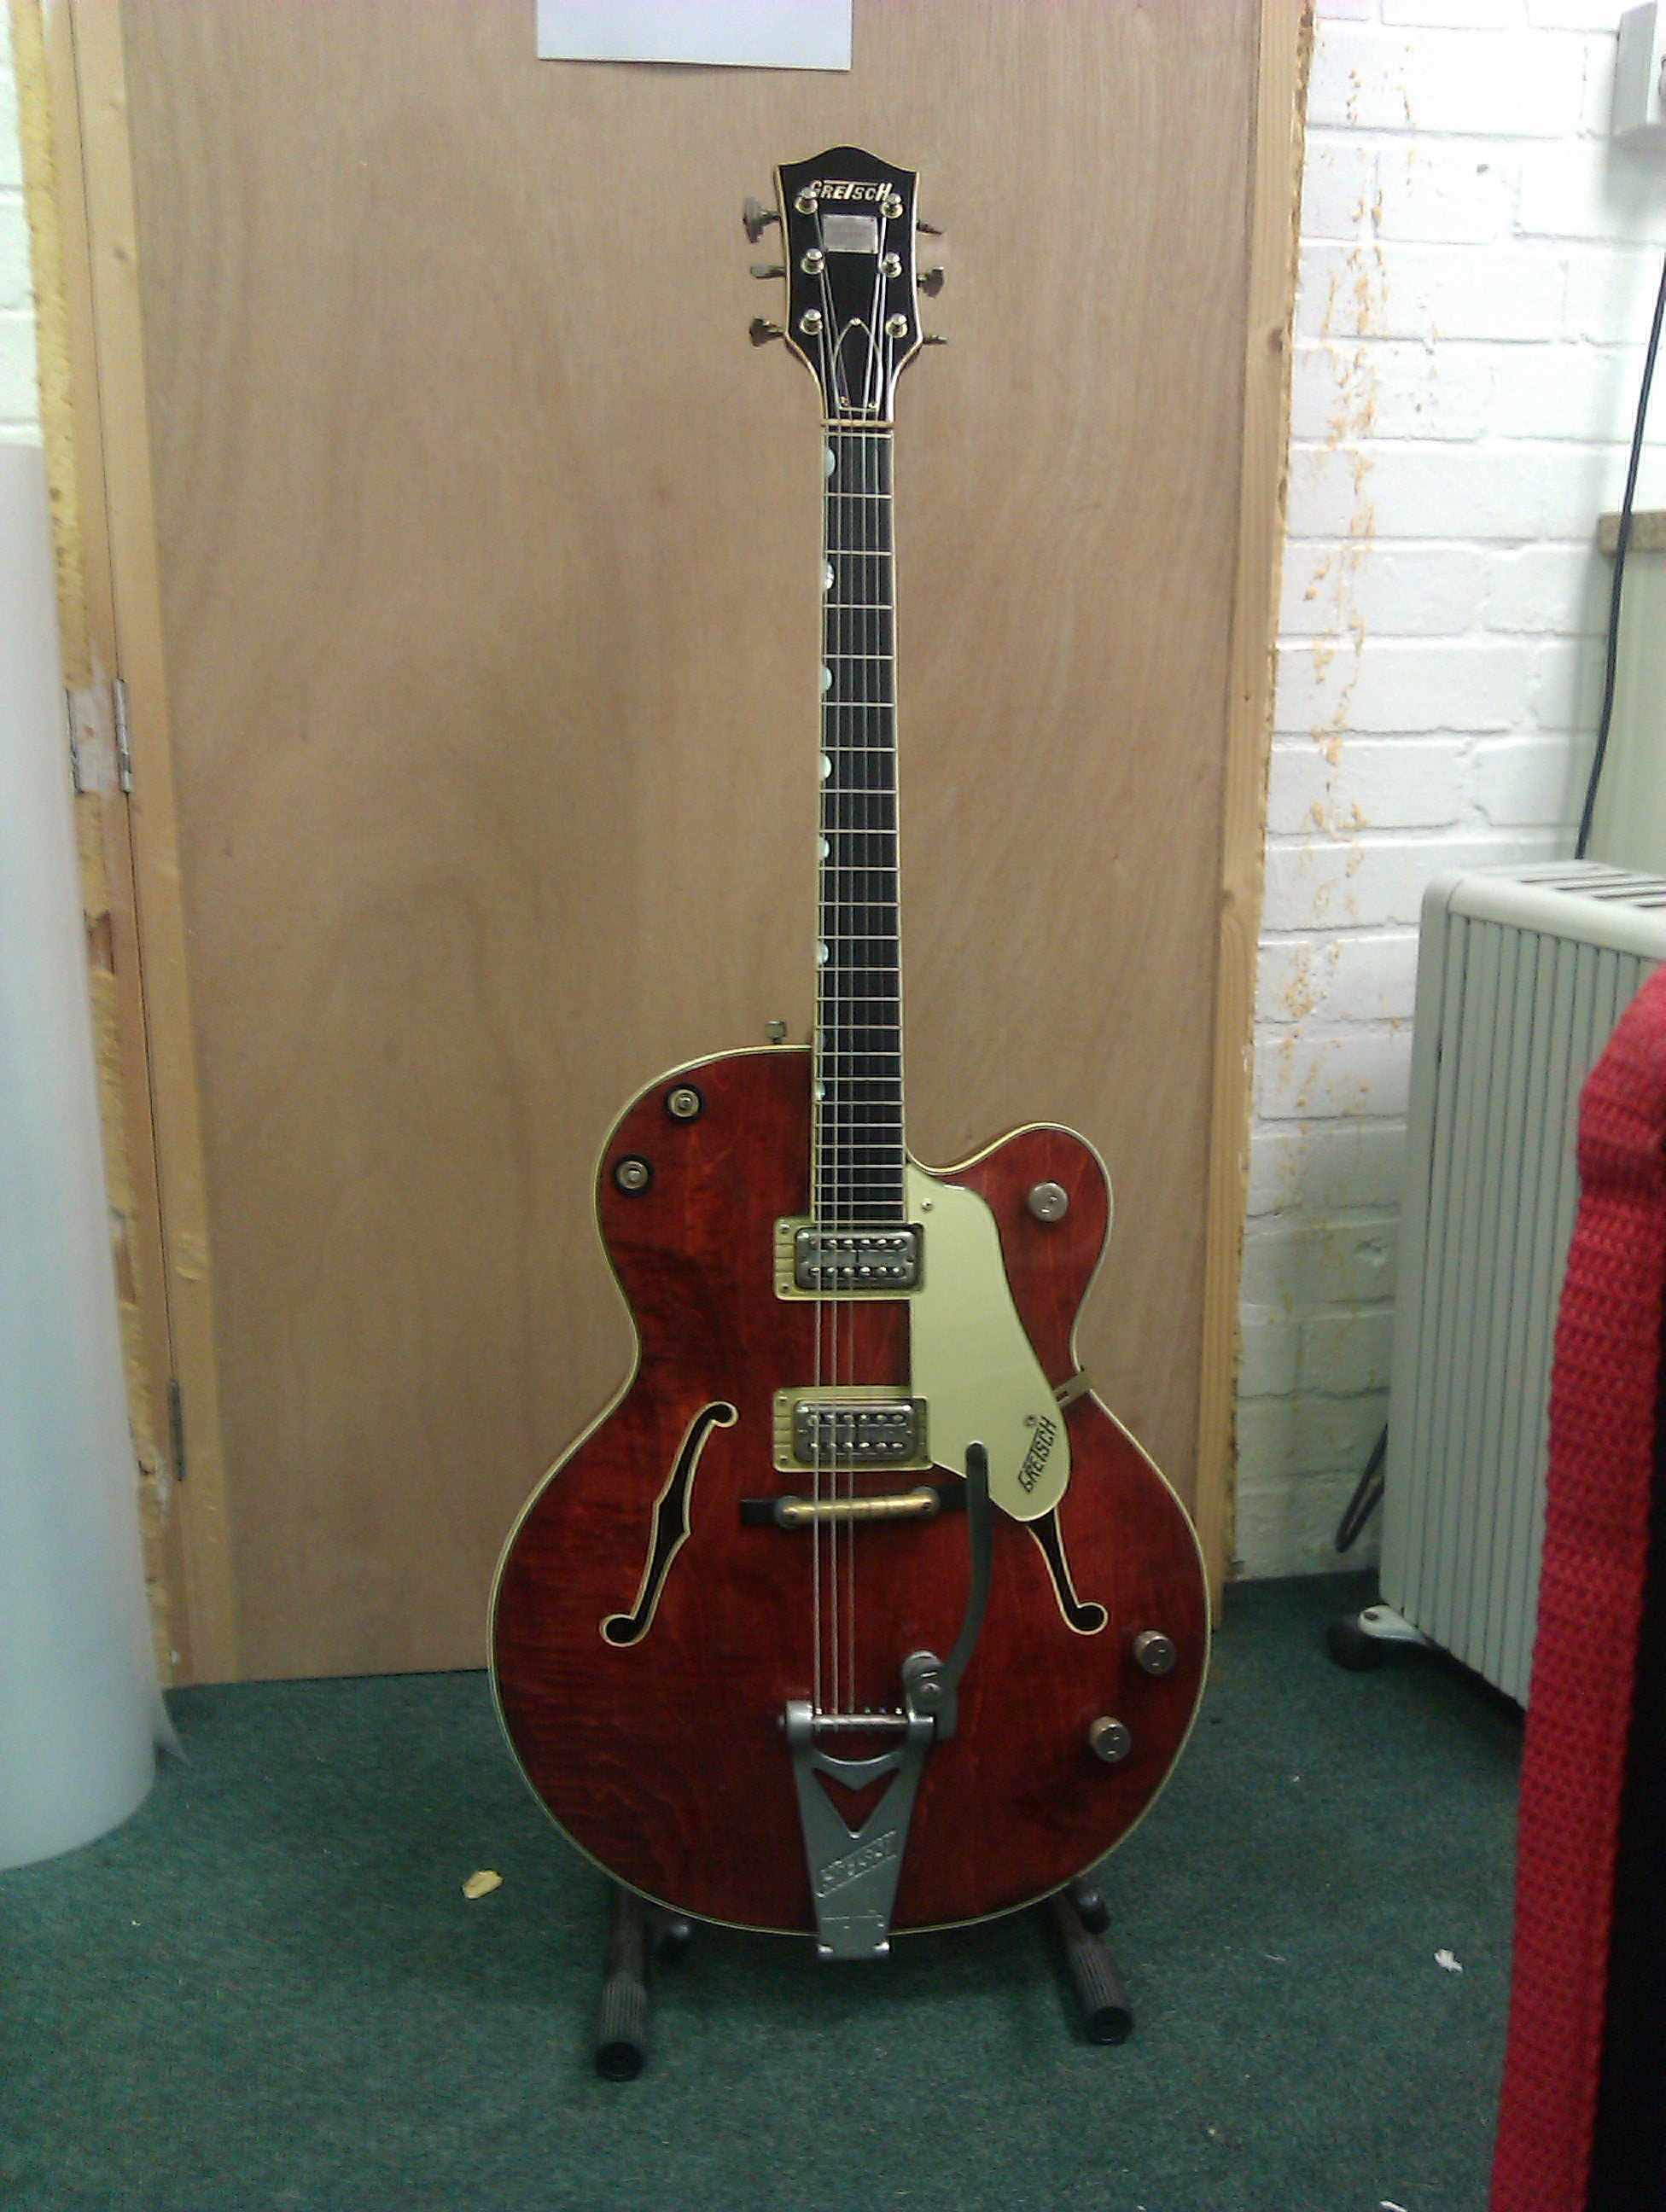 Classic Gretsch tone, with the Chet Atkins vibe